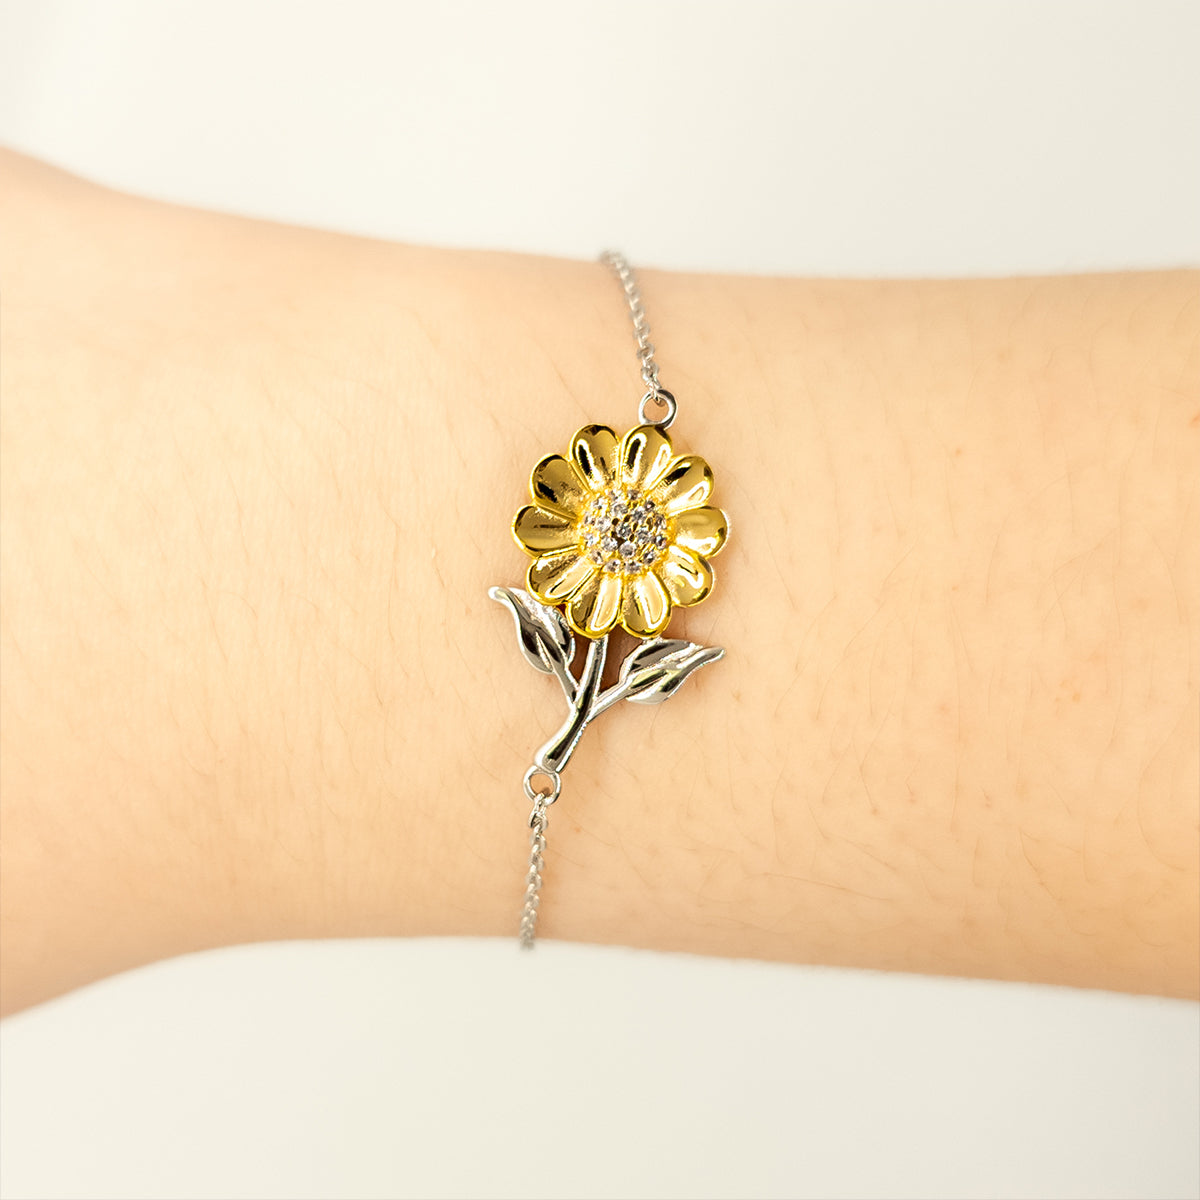 Partner Sunflower Bracelet - Always in My Heart - Engraved, Perfect Gift for Anniversaries, Birthdays, Valentines Day, Christmas, and More